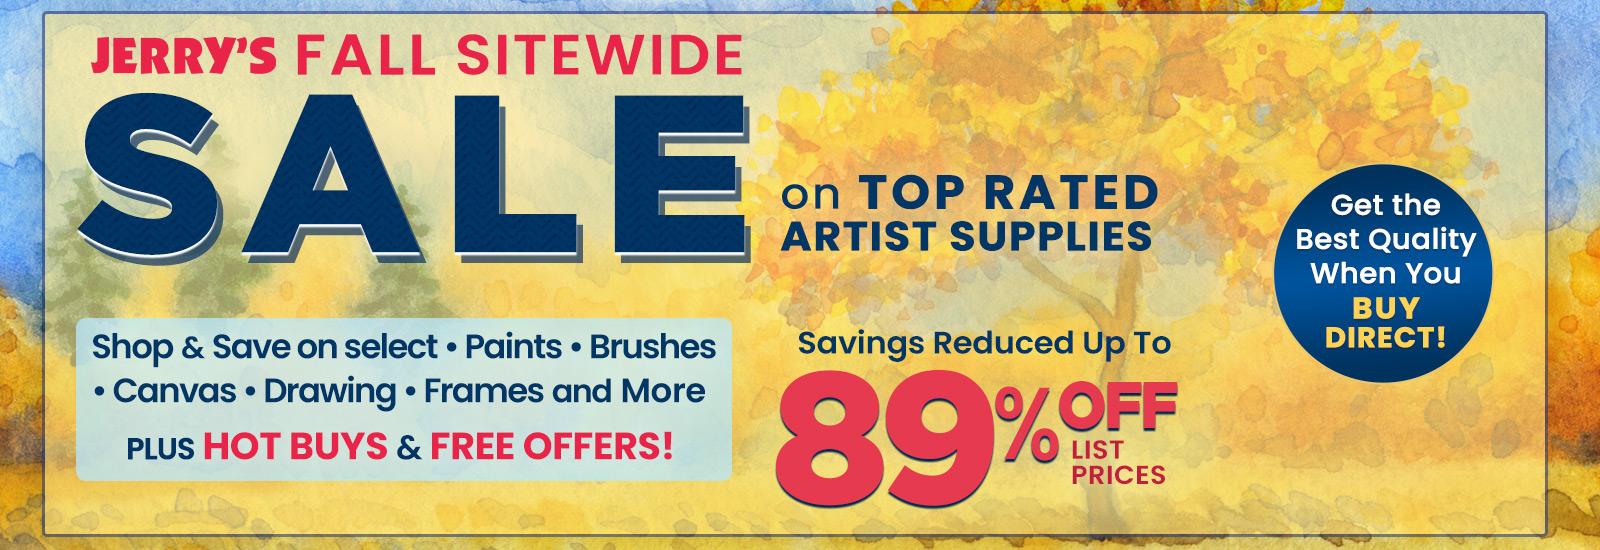 Jerry's Fall Sitewide Sale - Up to 89% Off List Prices